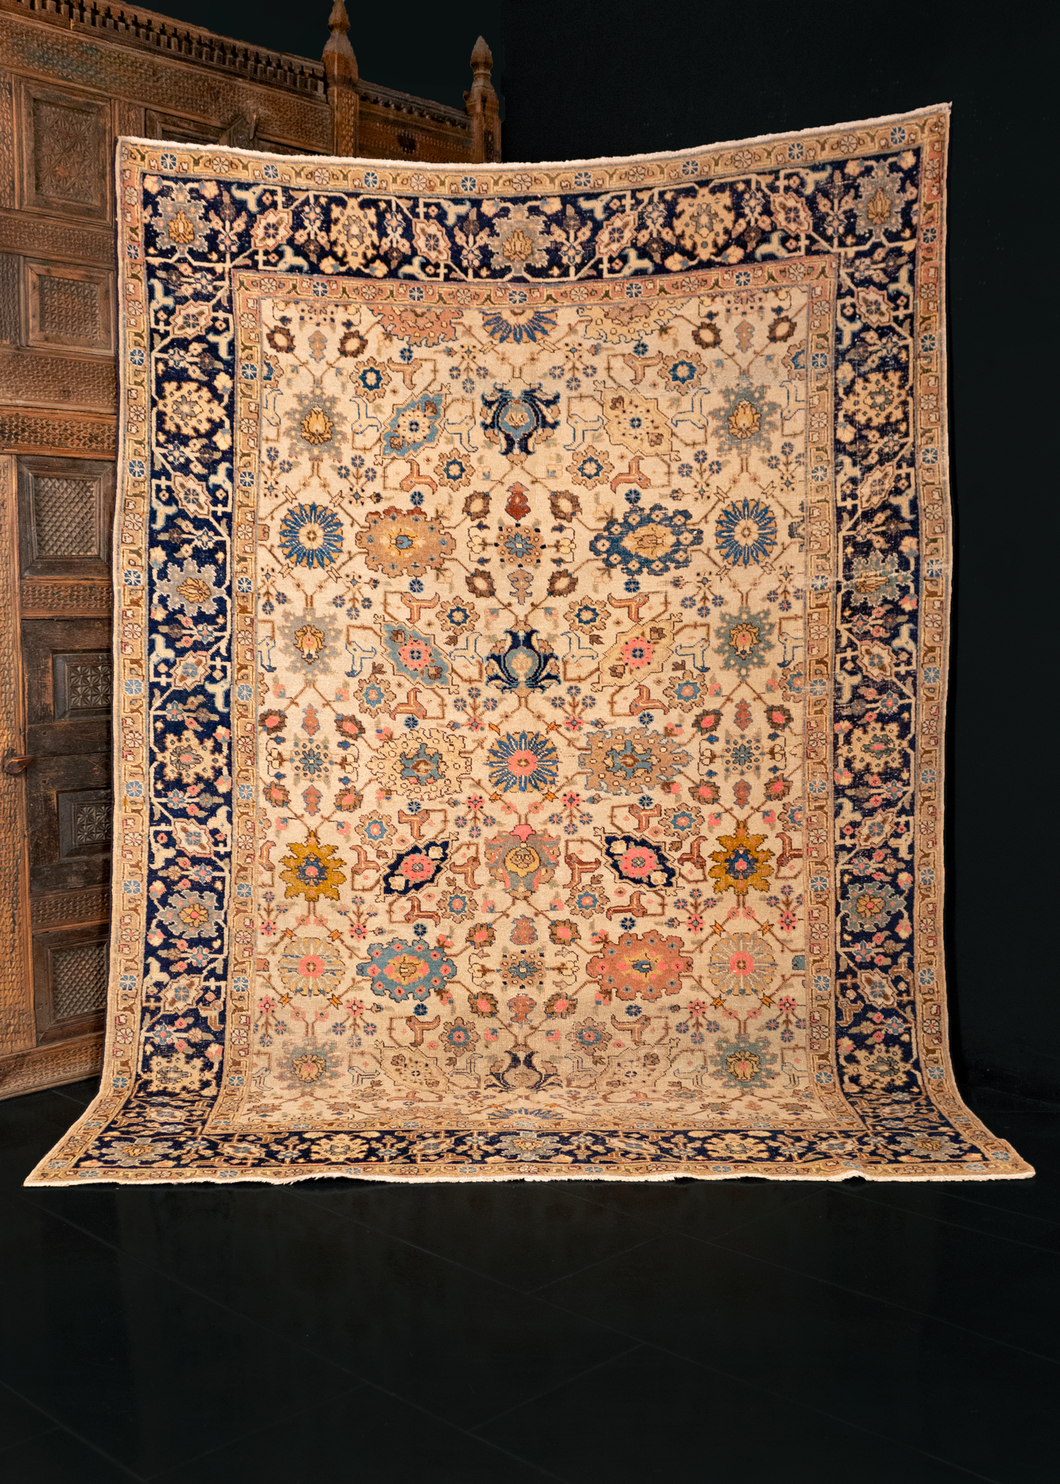 Mid century Tabriz rug handwoven in Northwest Iran. Design is multiple interconnected palmettes. Ivory ground and flowers in blue, yellow, and pink. 